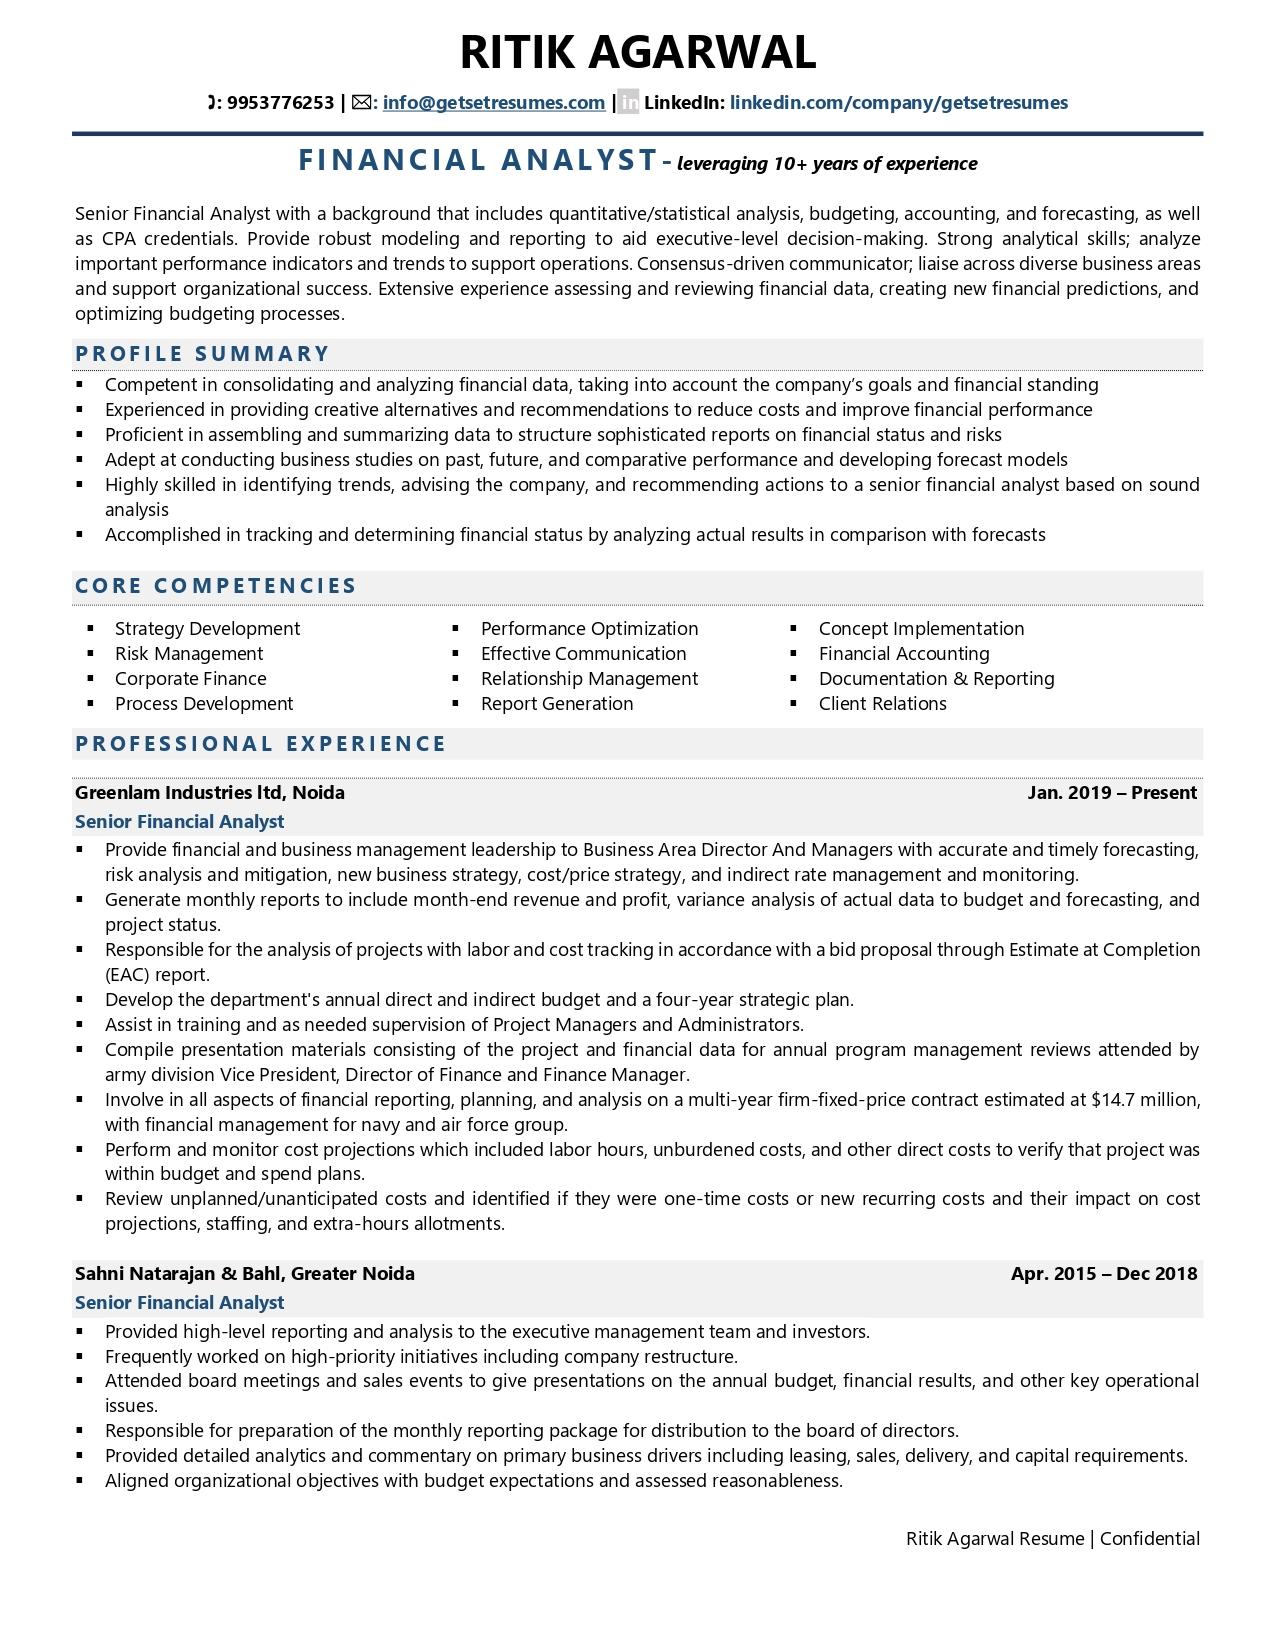 Financial Analyst - Resume Example & Template